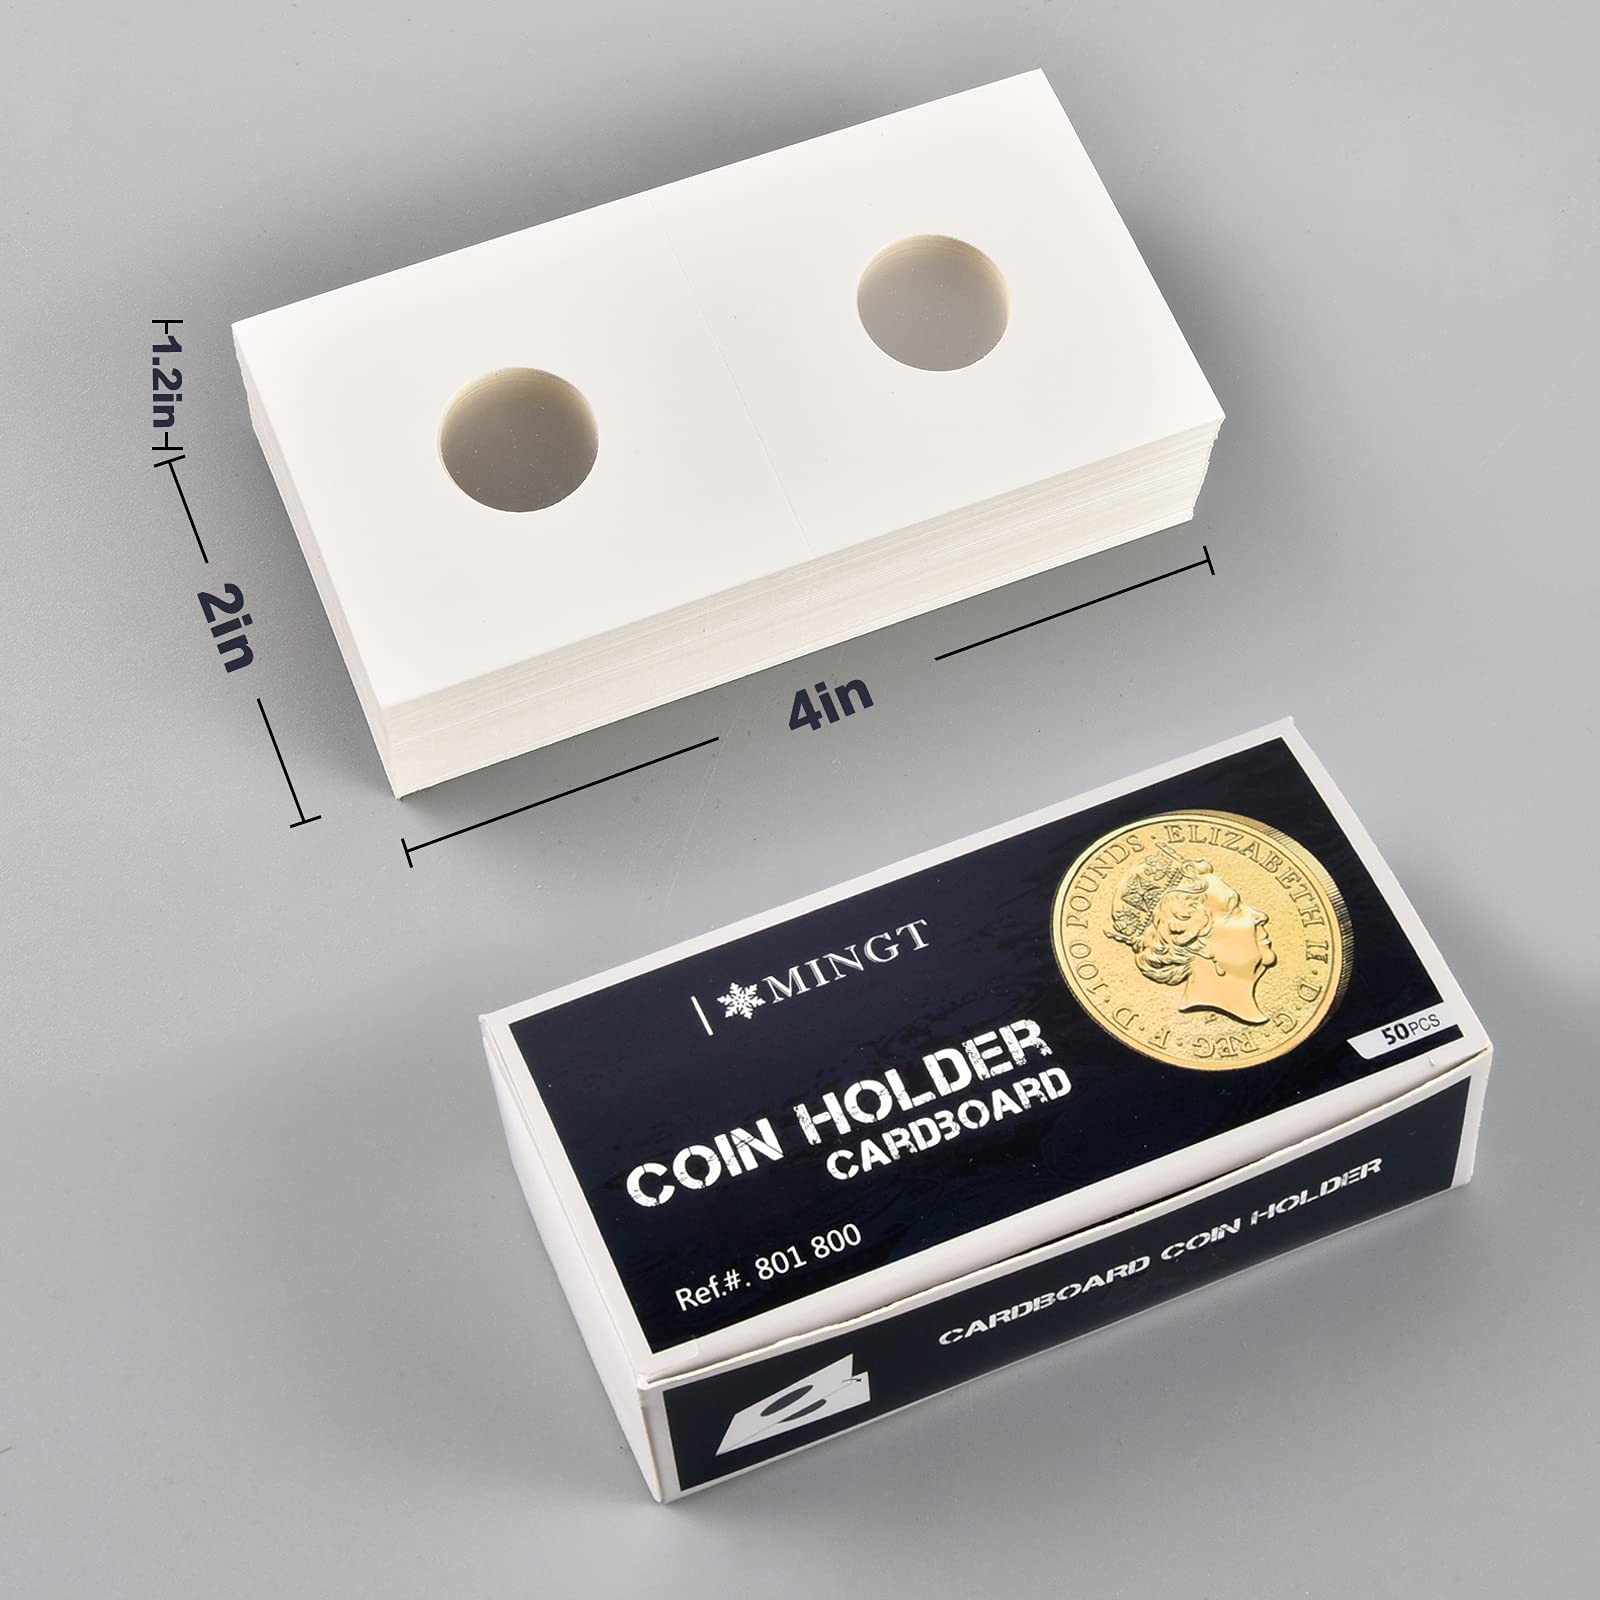 Cardboard Coin Holders – The Coin Supply Store